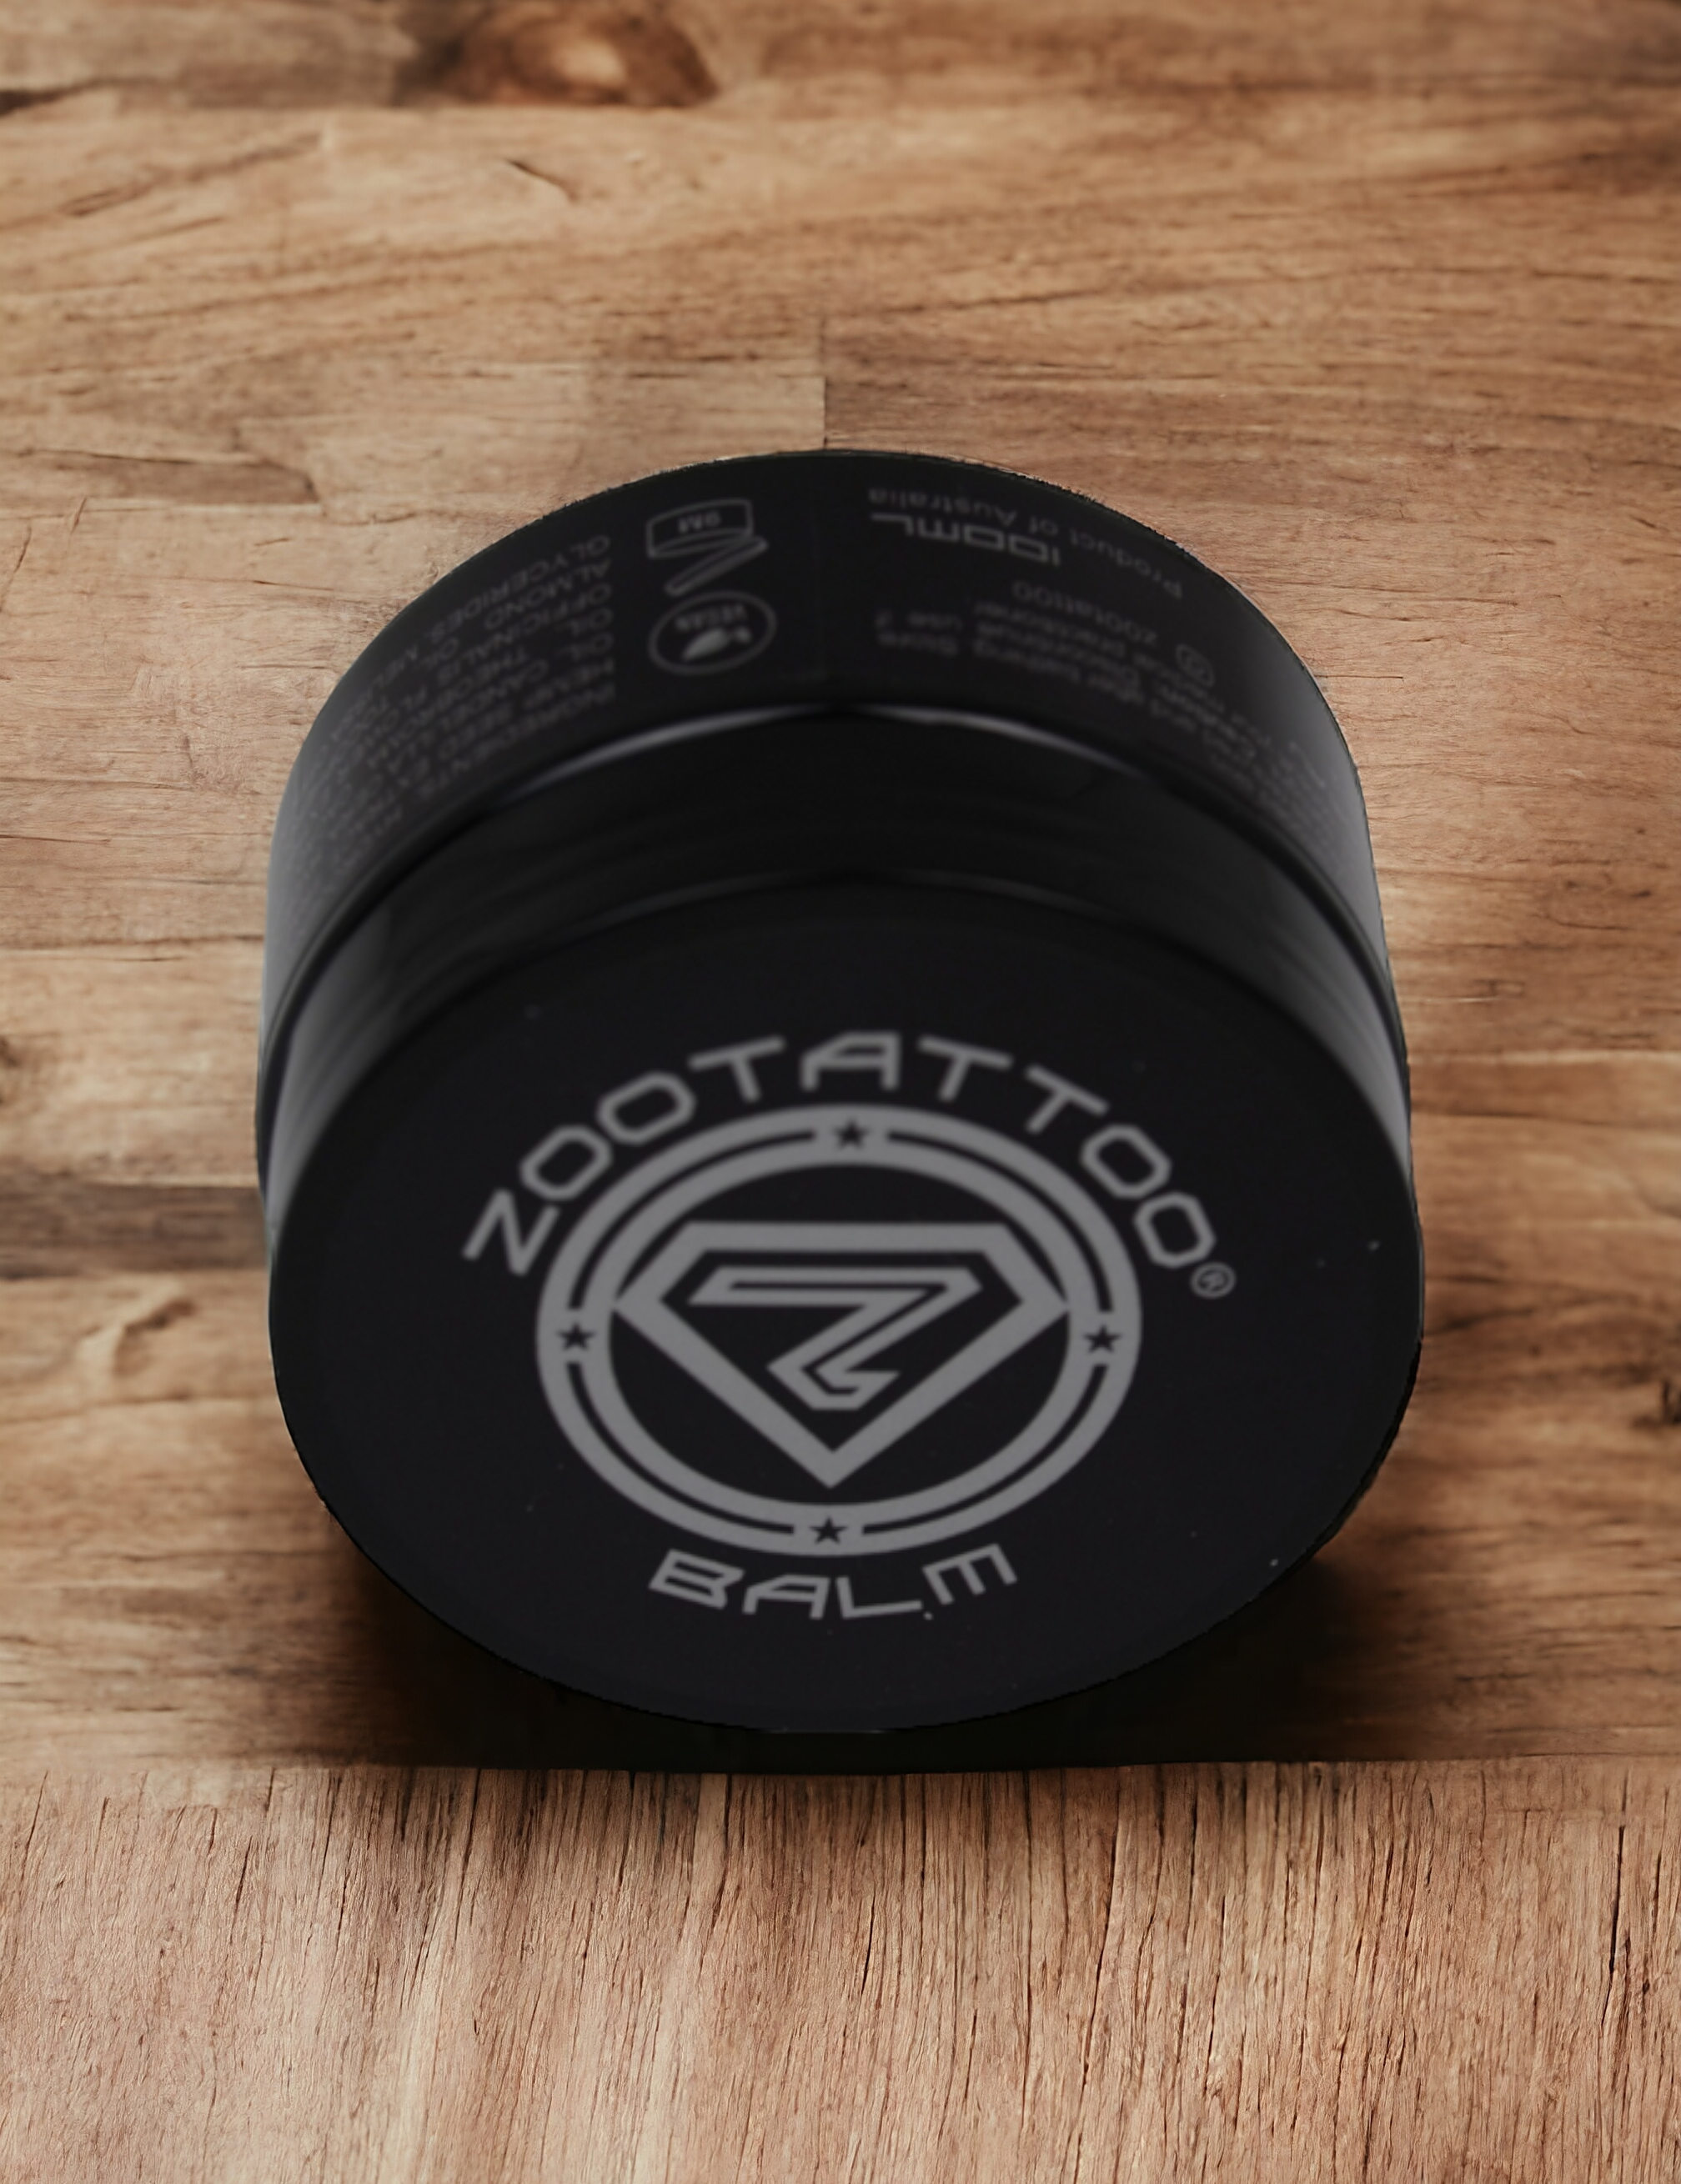 Z Balm - The premium brand when it comes to tattoo aftercare - Tattoo aftercare Australia